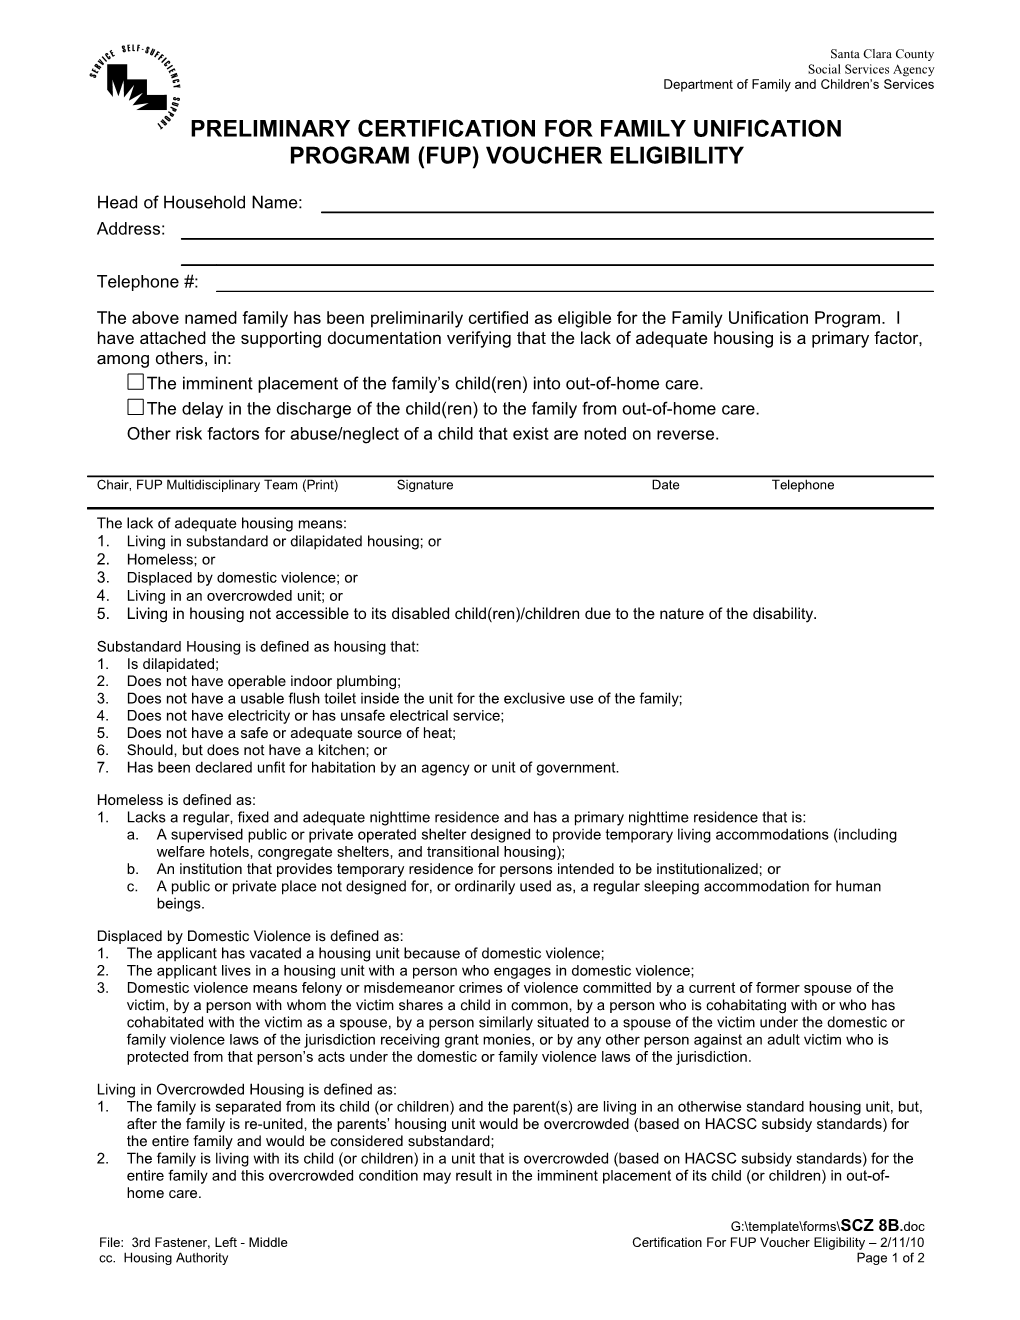 Certification for Fup-Voucher Eligibility